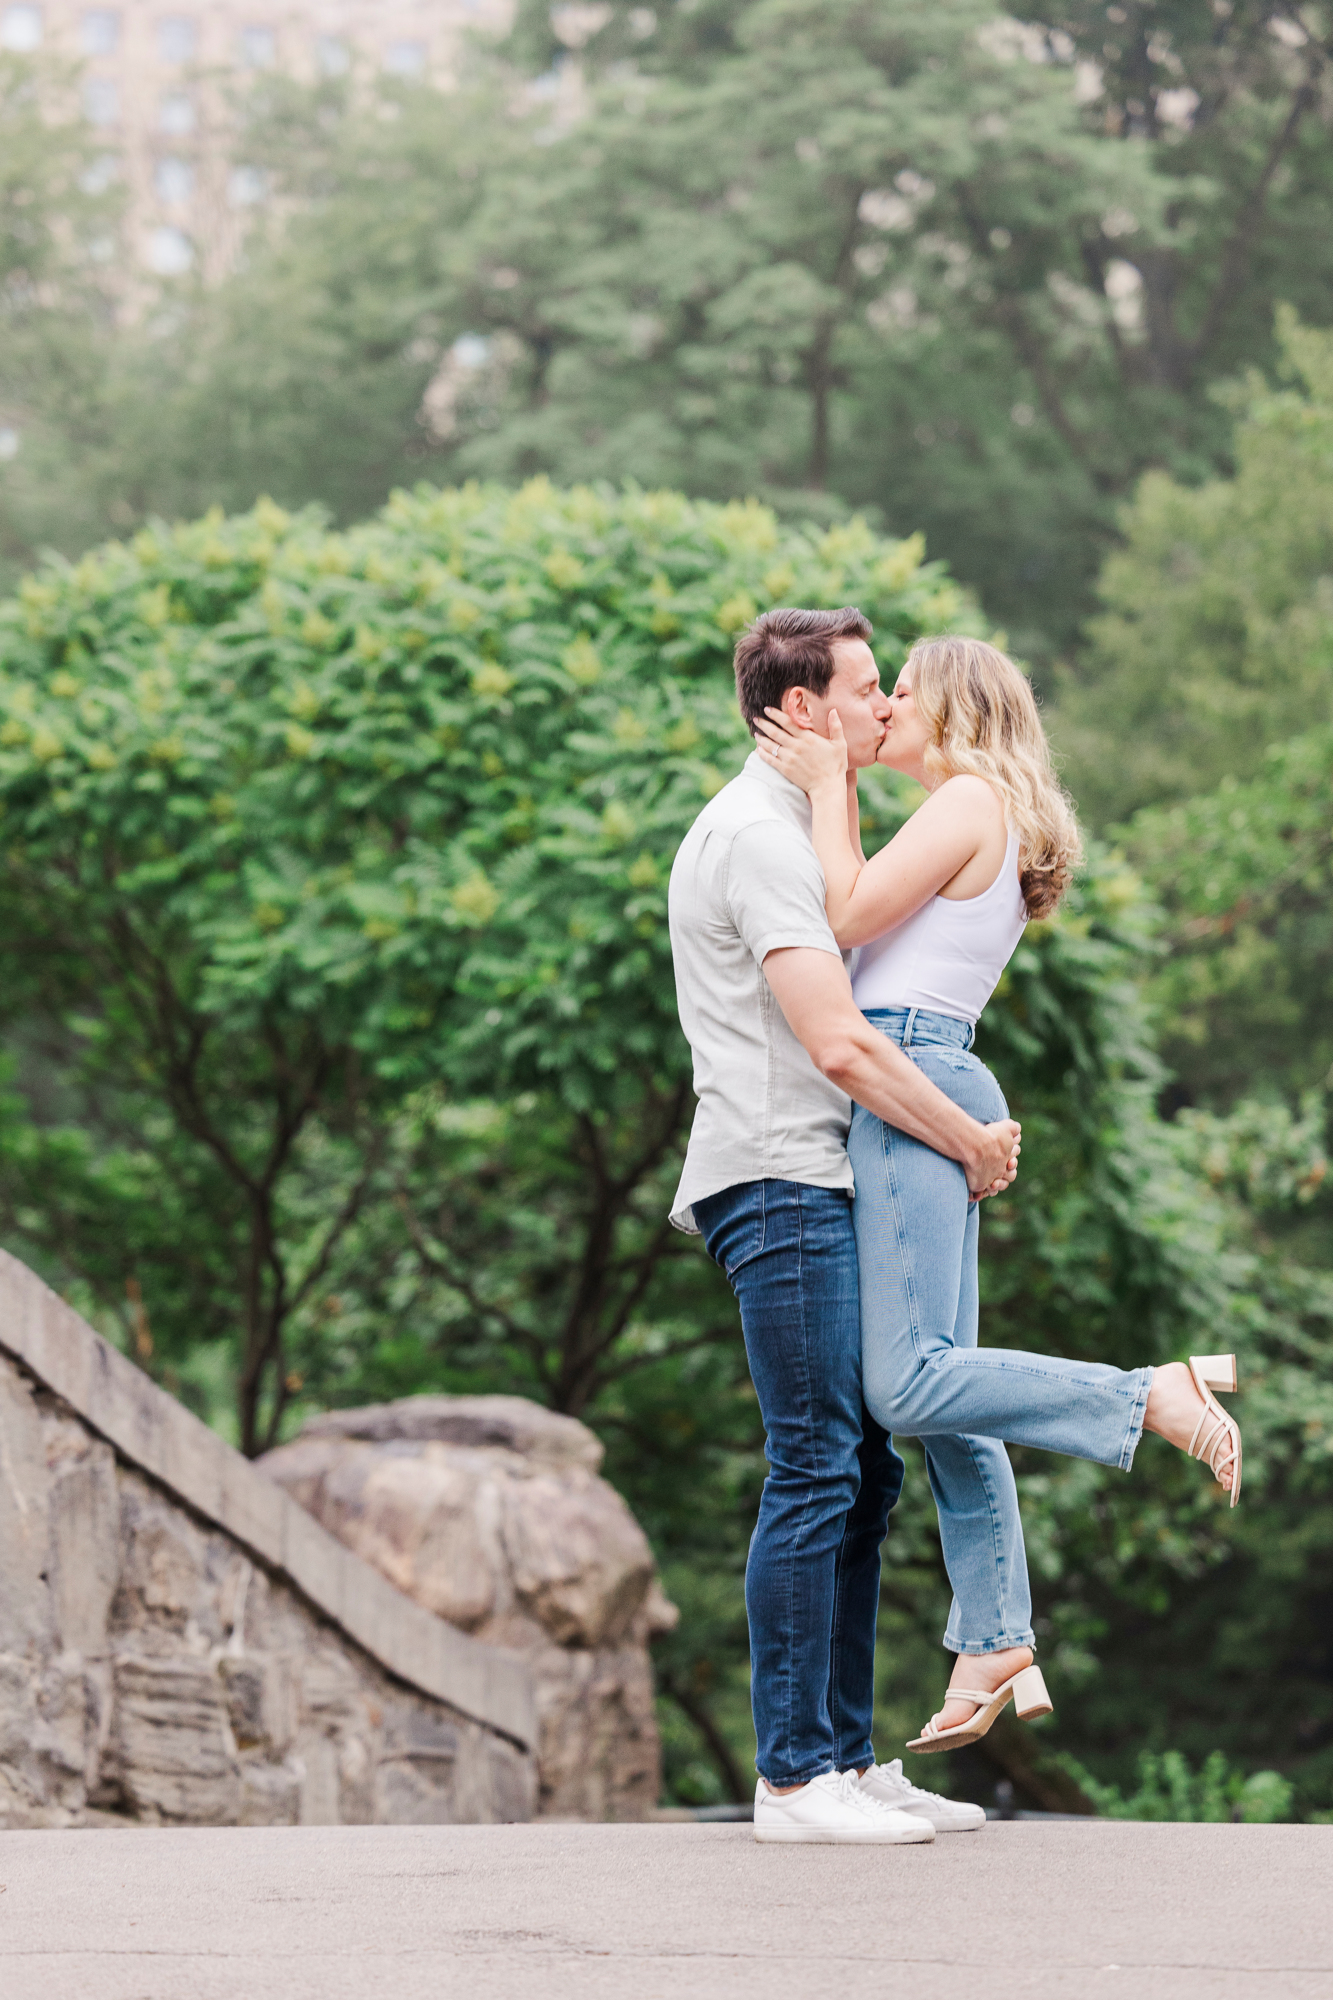 Jaw-Dropping Engagement Session in Central Park